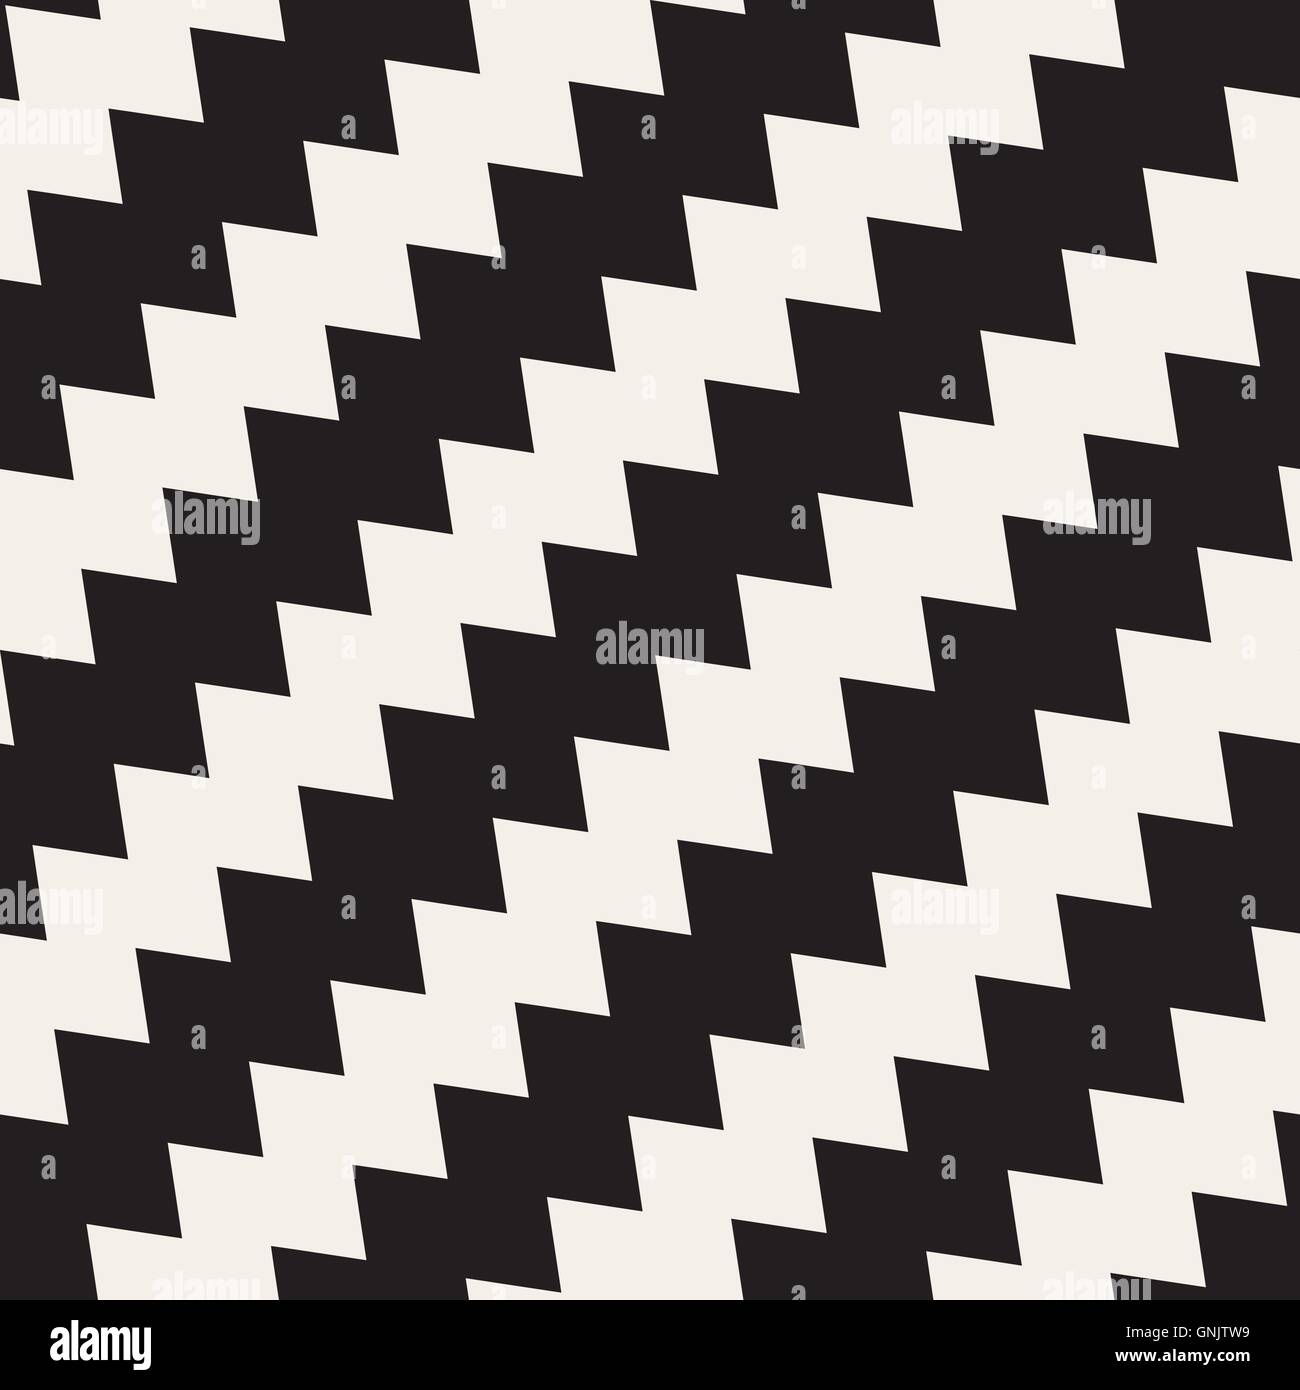 Vector Seamless Black and White ZigZag Diagonal Lines Geometric Pattern ...